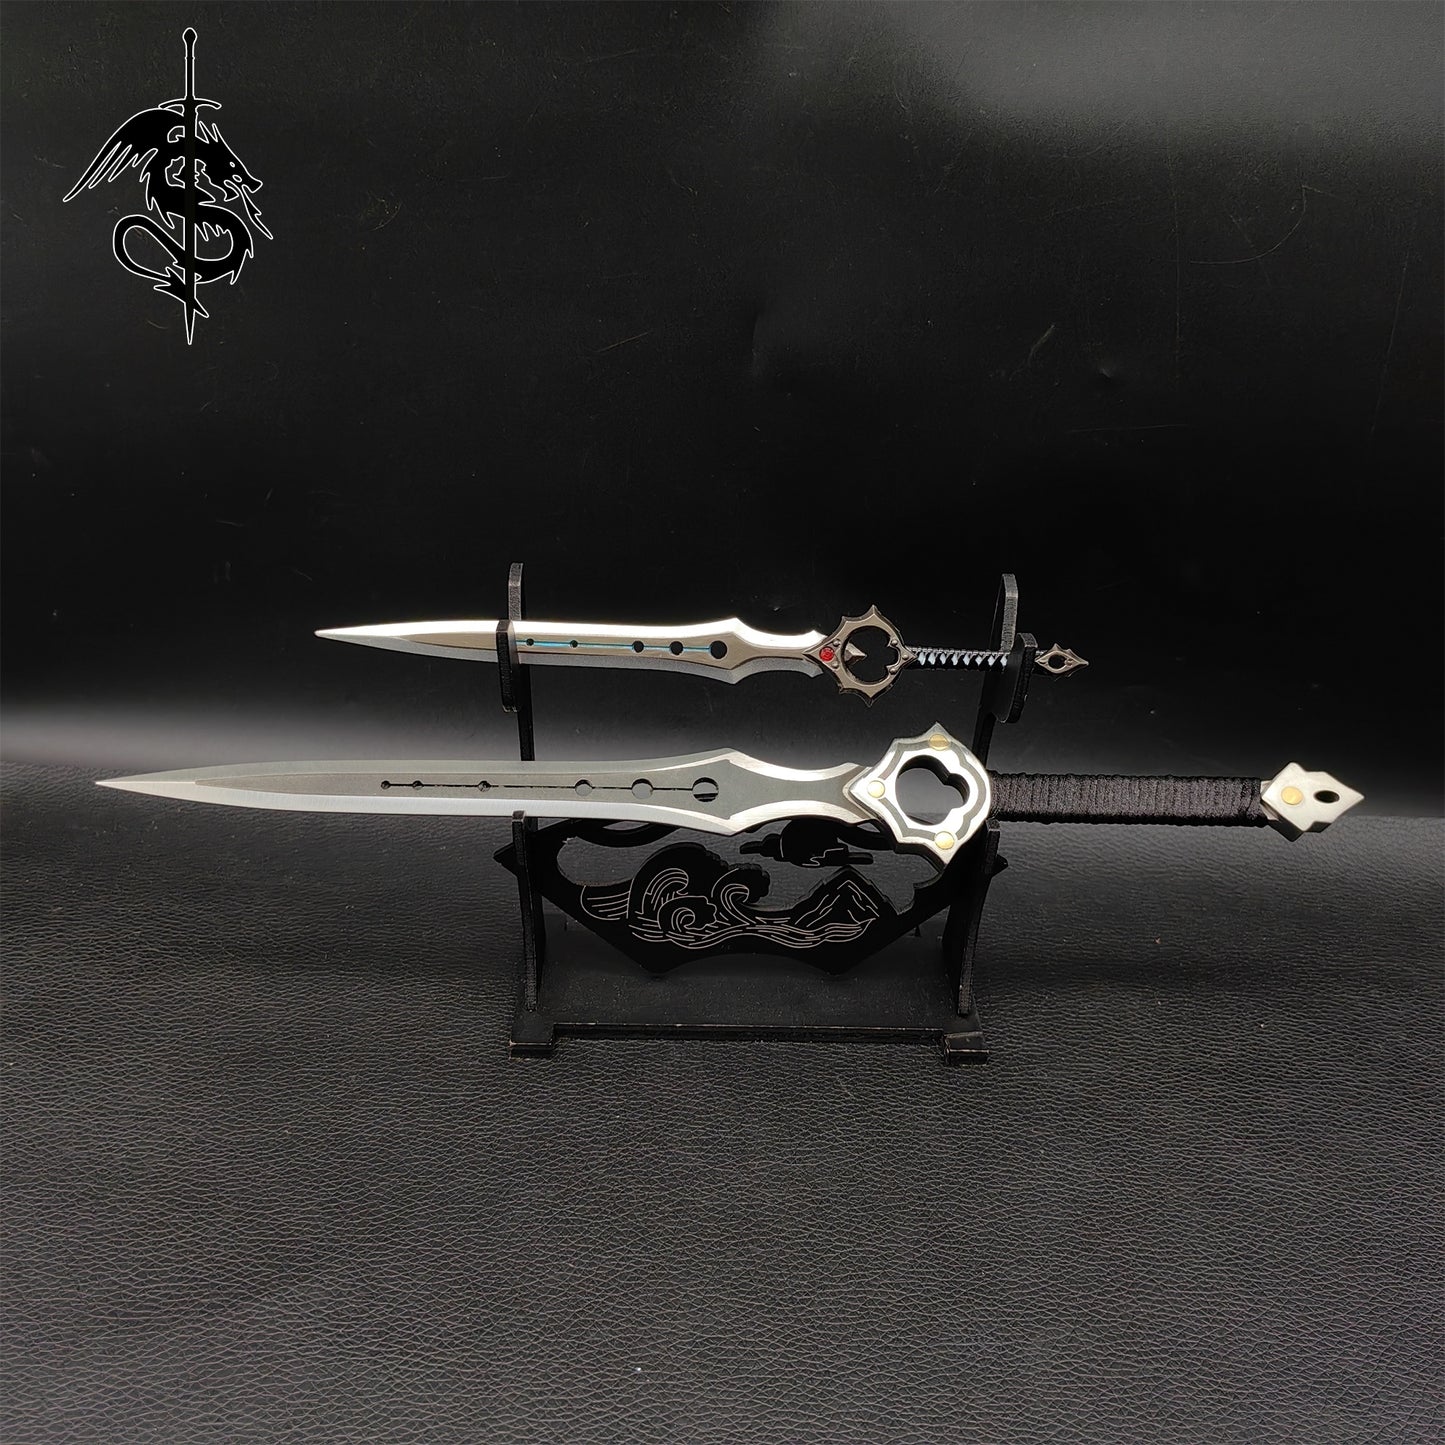  Infinity Sword 7.9" And 11.8" Infinity Blade Collection